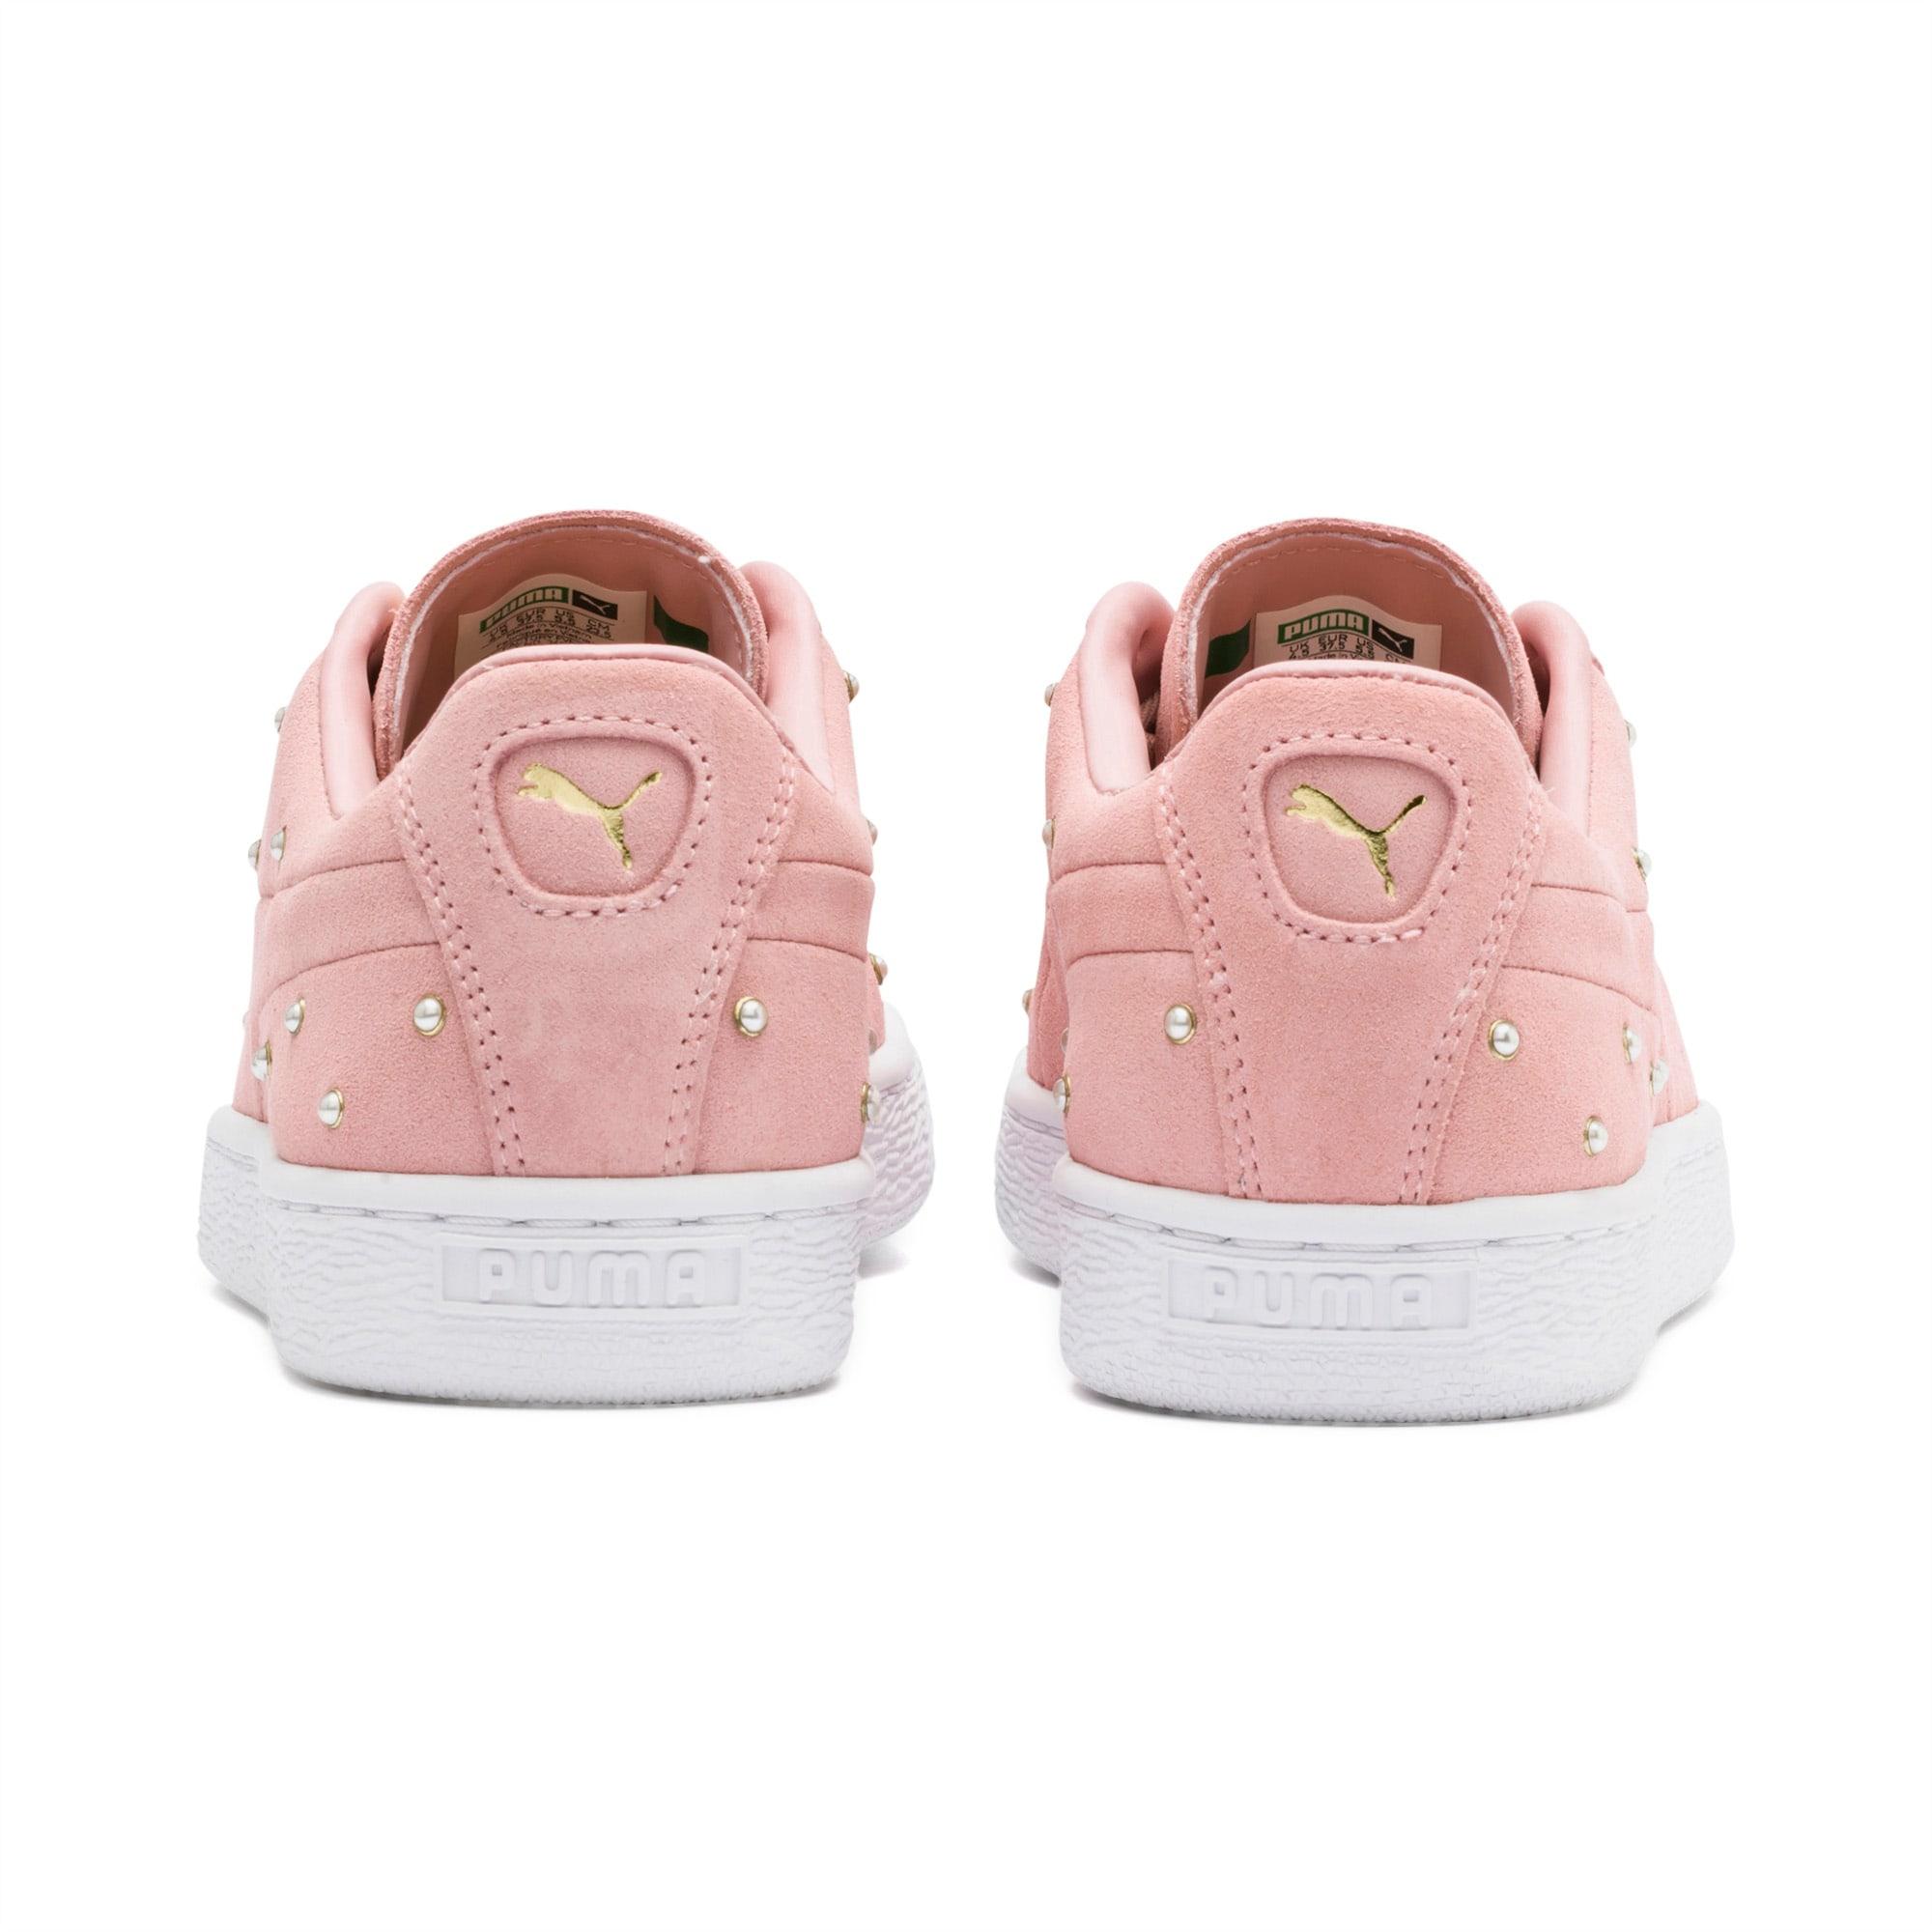 PUMA Suede Pearl Studs Wn's Trainers in Pink - Lyst